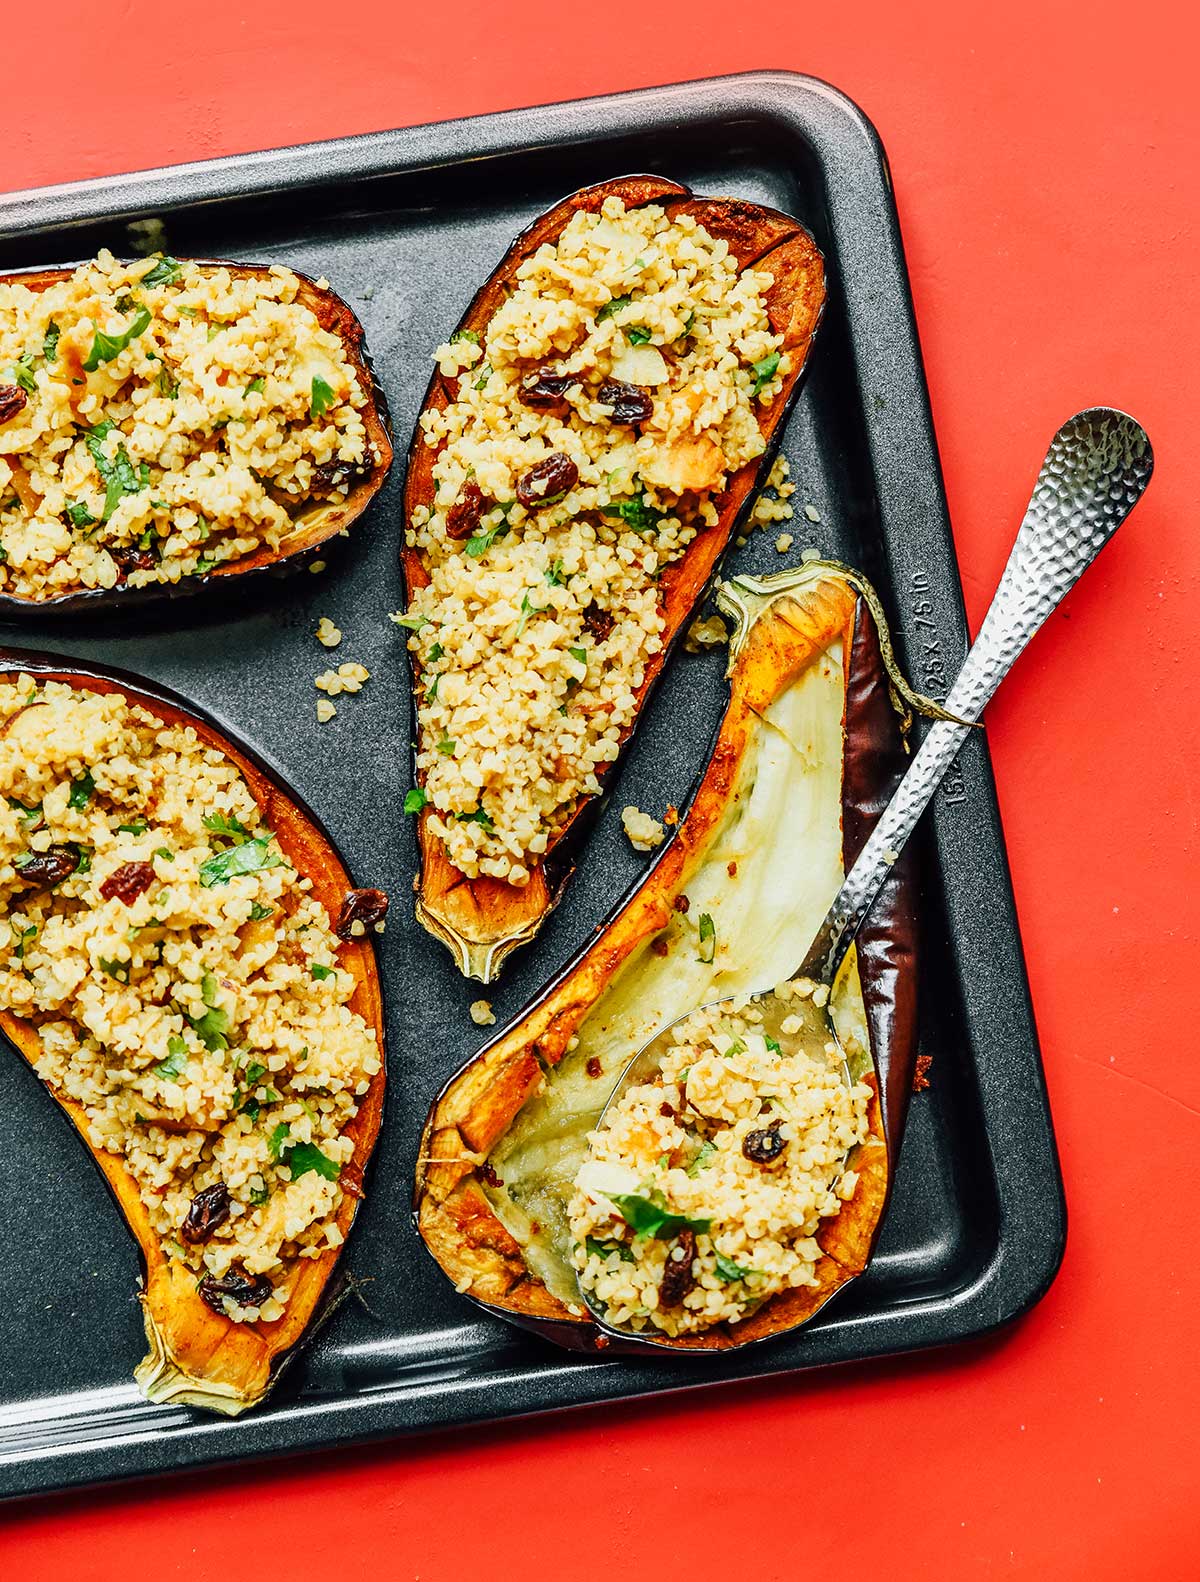 A baking sheet with three stuffed eggplants and a fourth that is begin filled with the stuffing